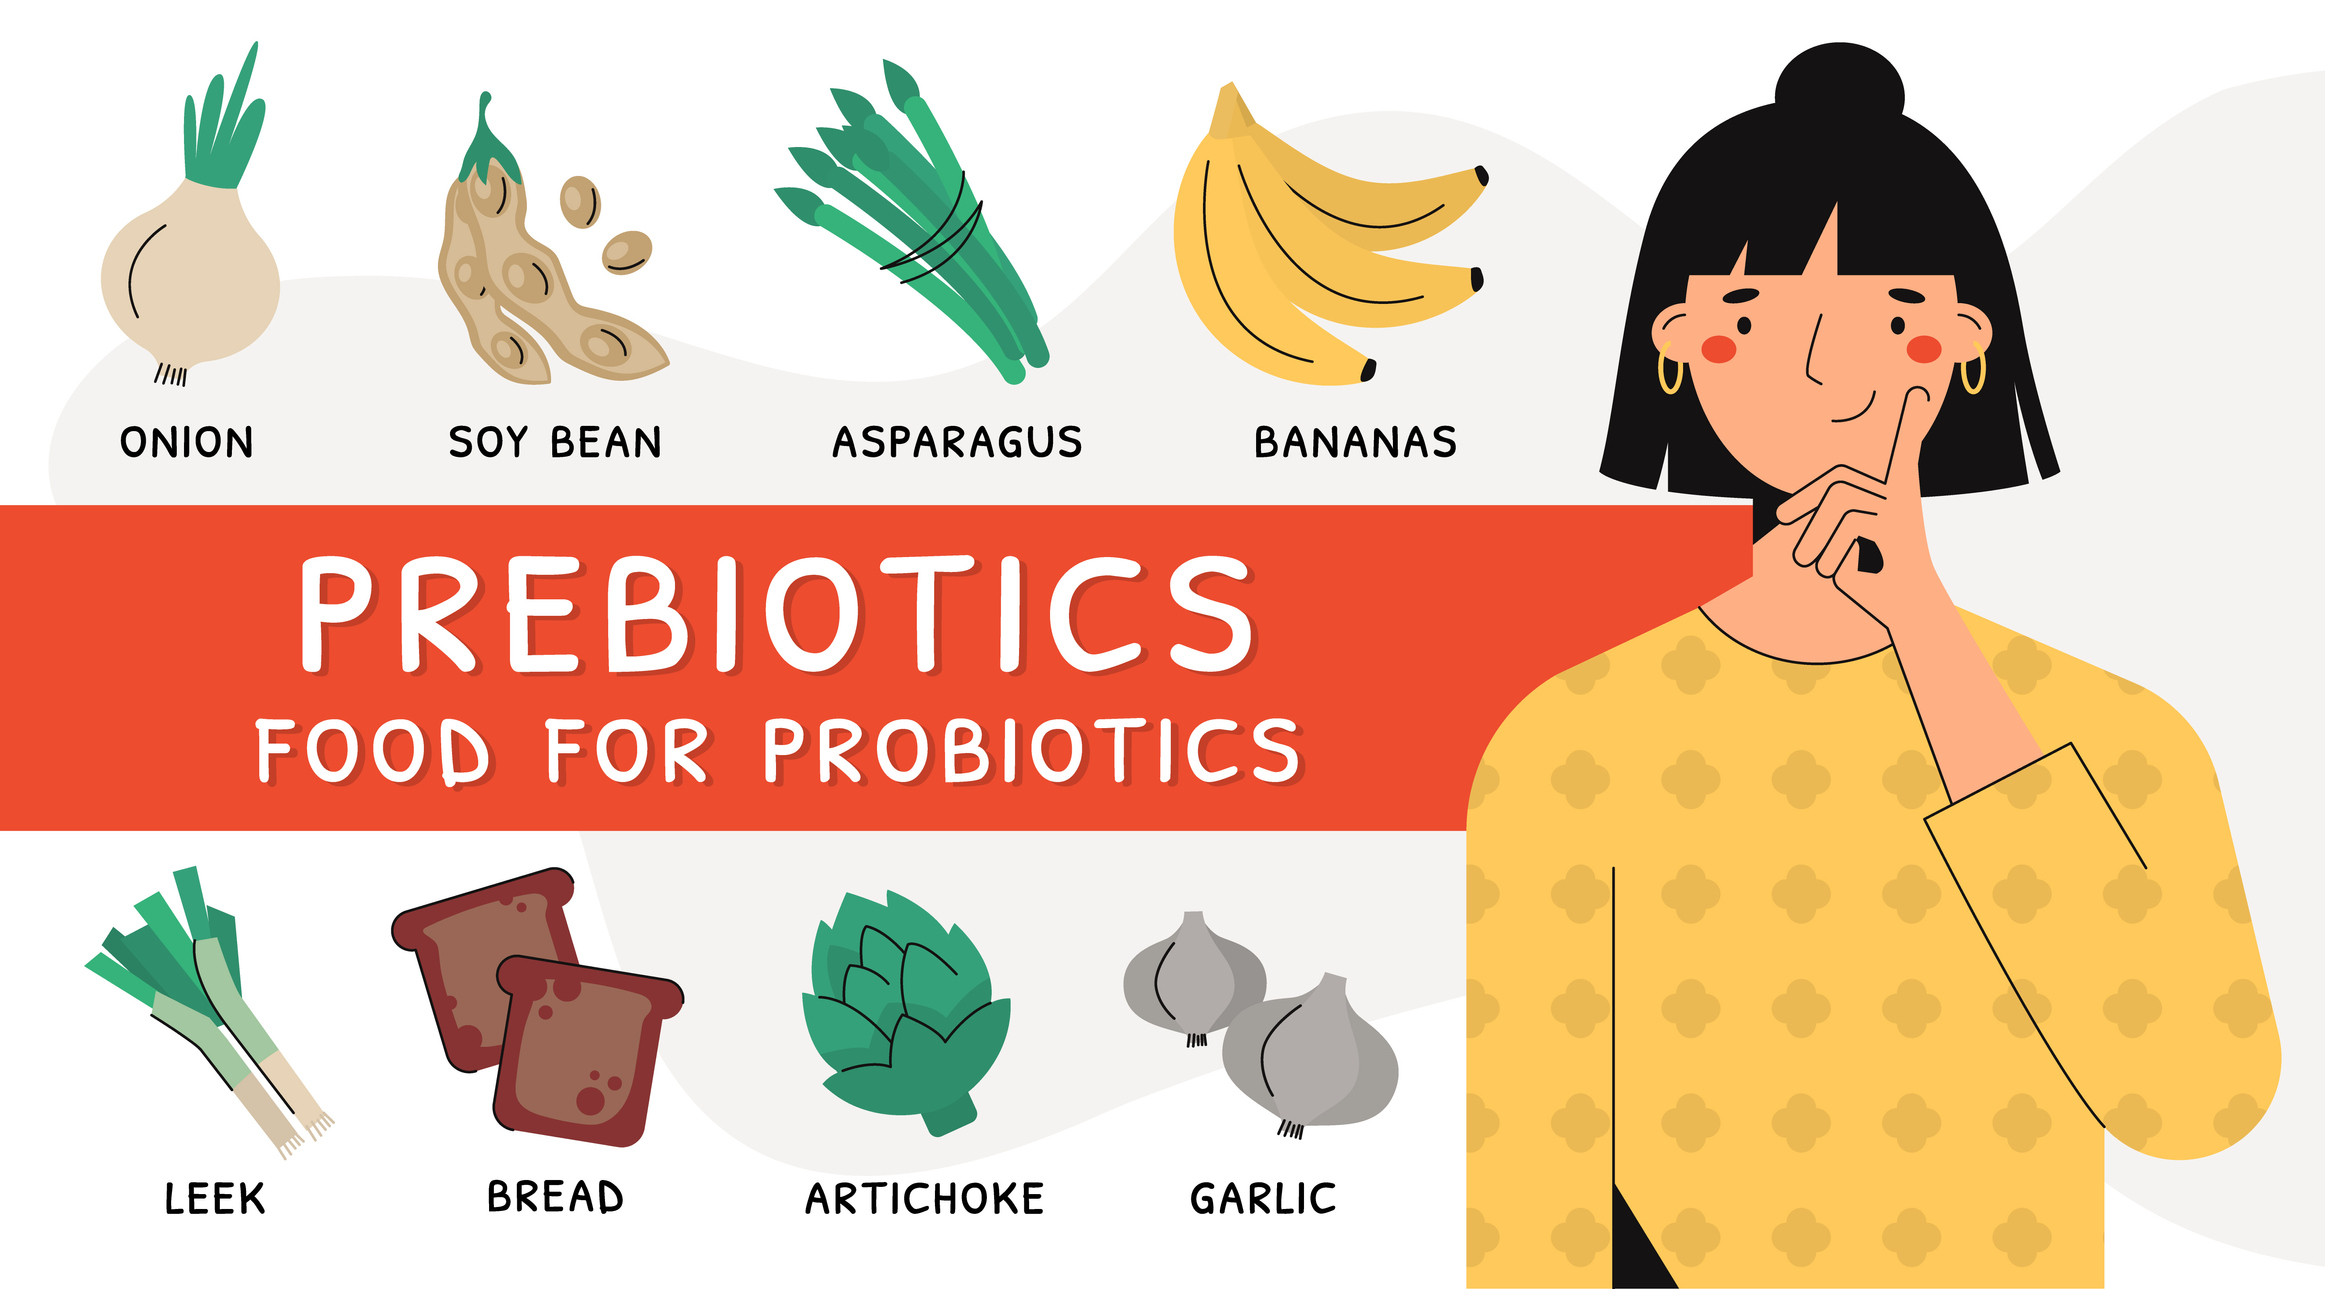 An image of an infographic with cartoon images representing prebiotic foods with text below.